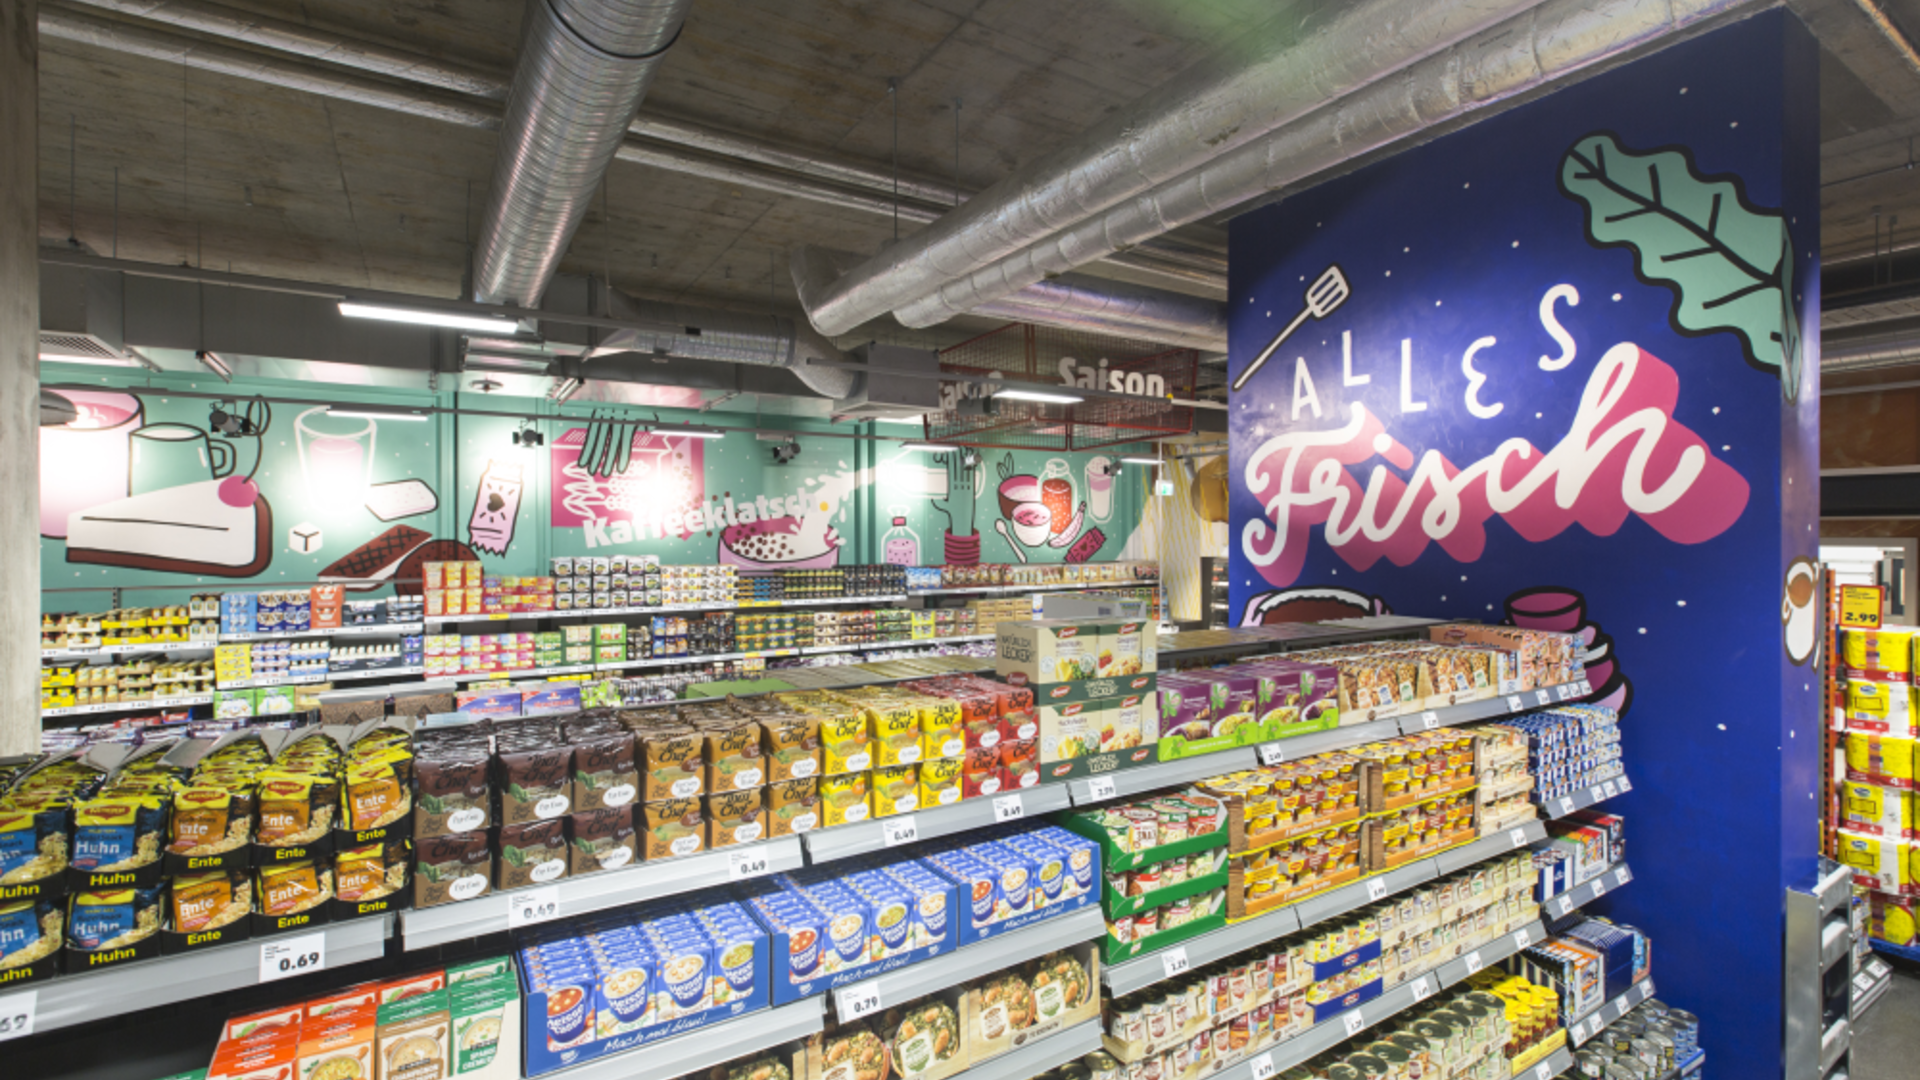 PENNY: A successful supermarket transformation with urban art